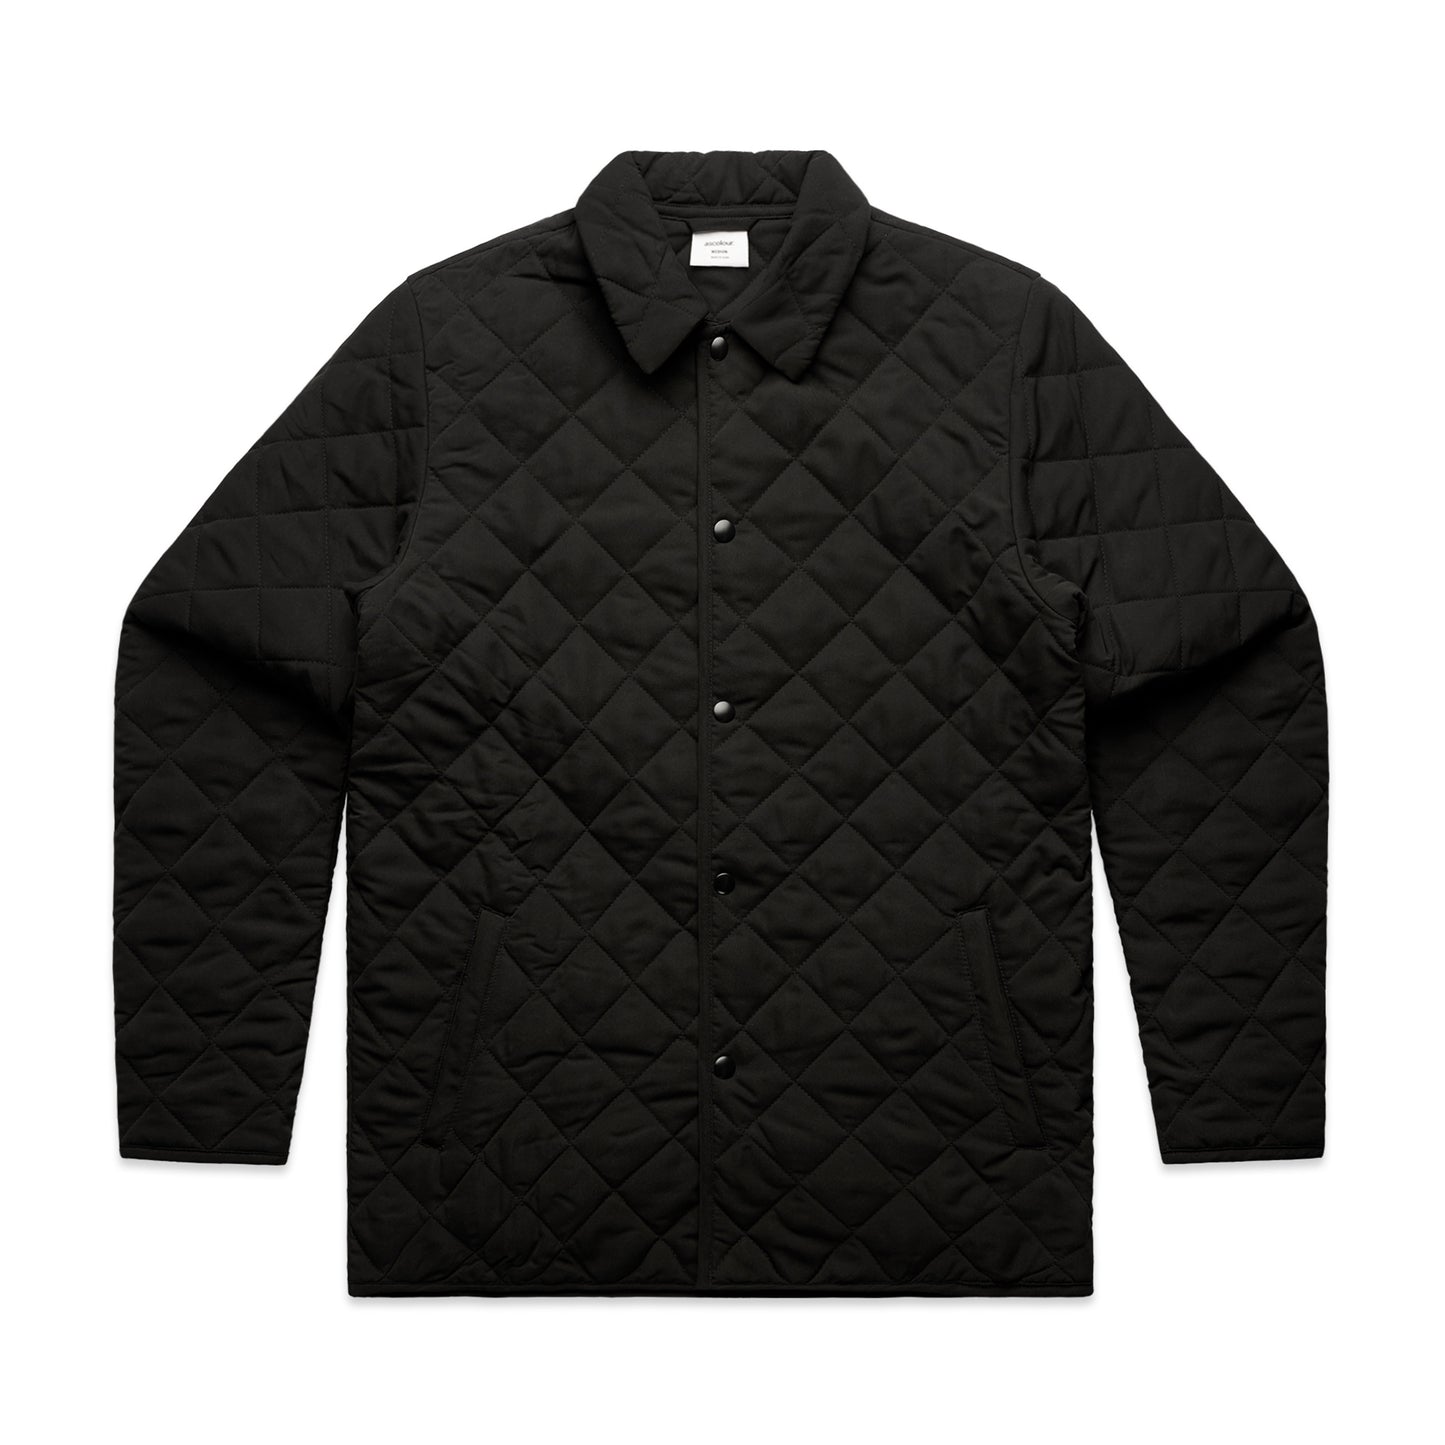 MENS QUILTED JACKET - 5525